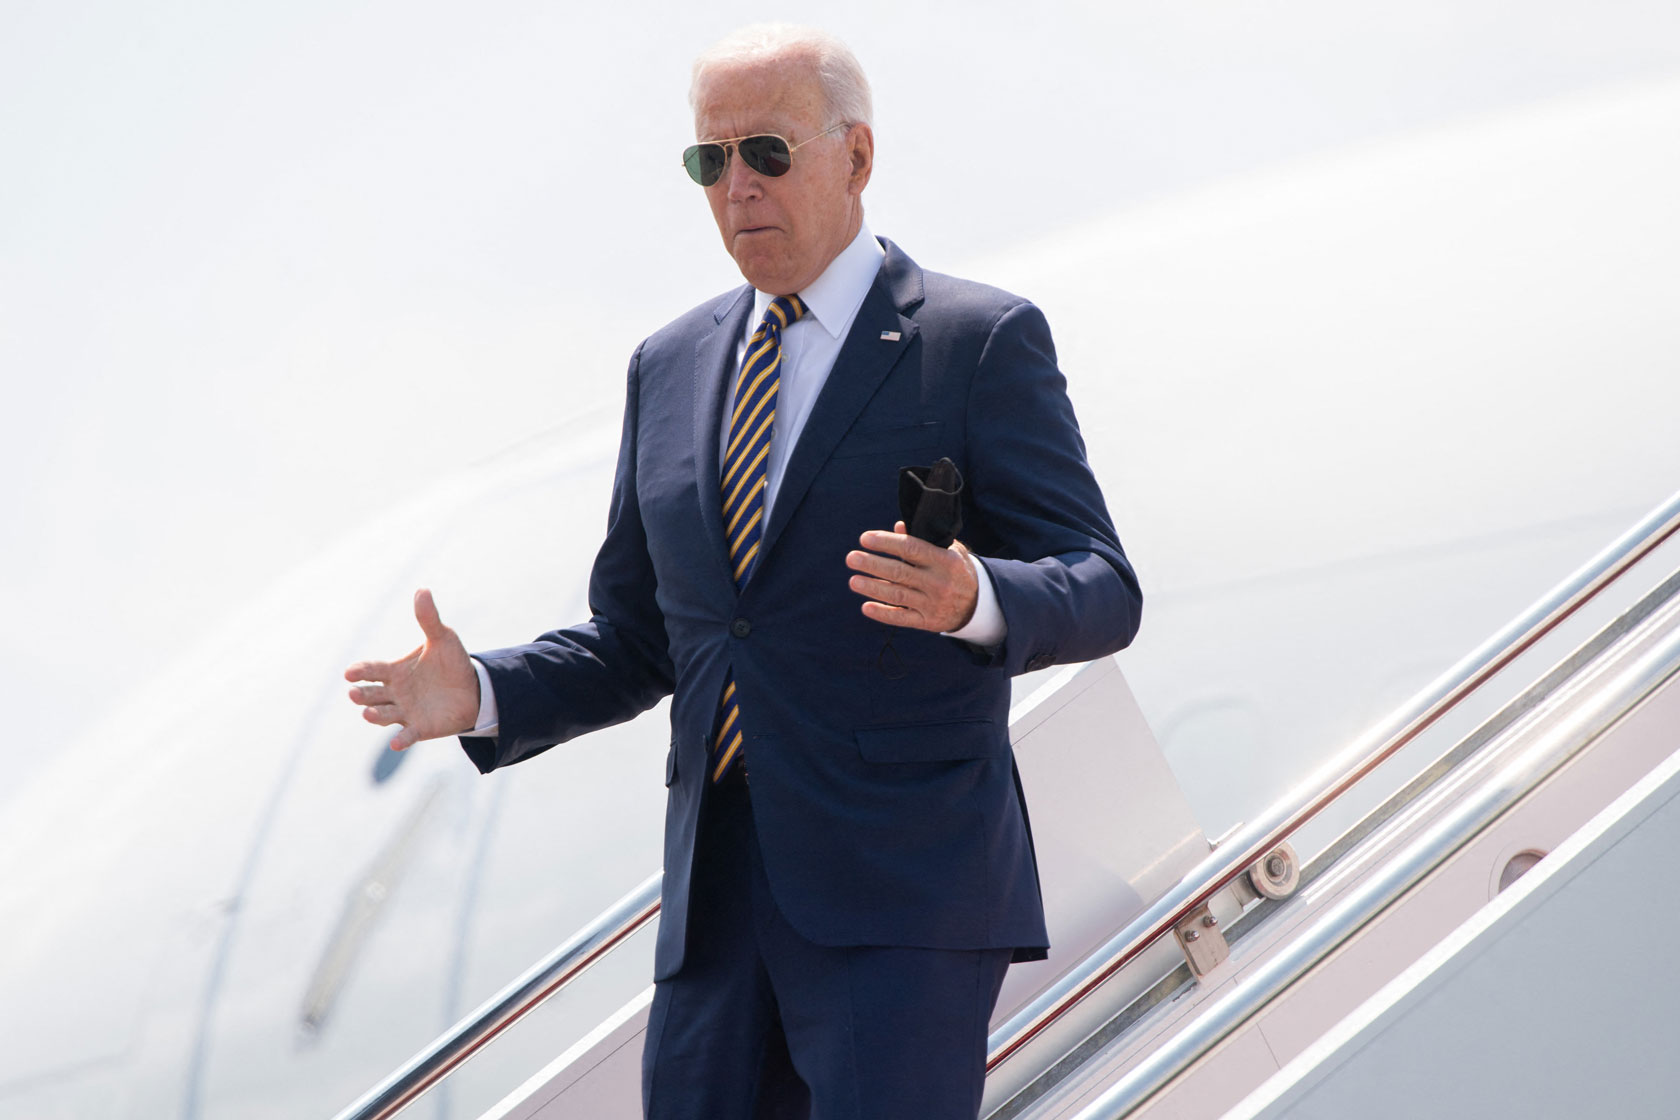 Photo shows Joe Biden wearing a suit as he steps exists an airplane on a sunny day